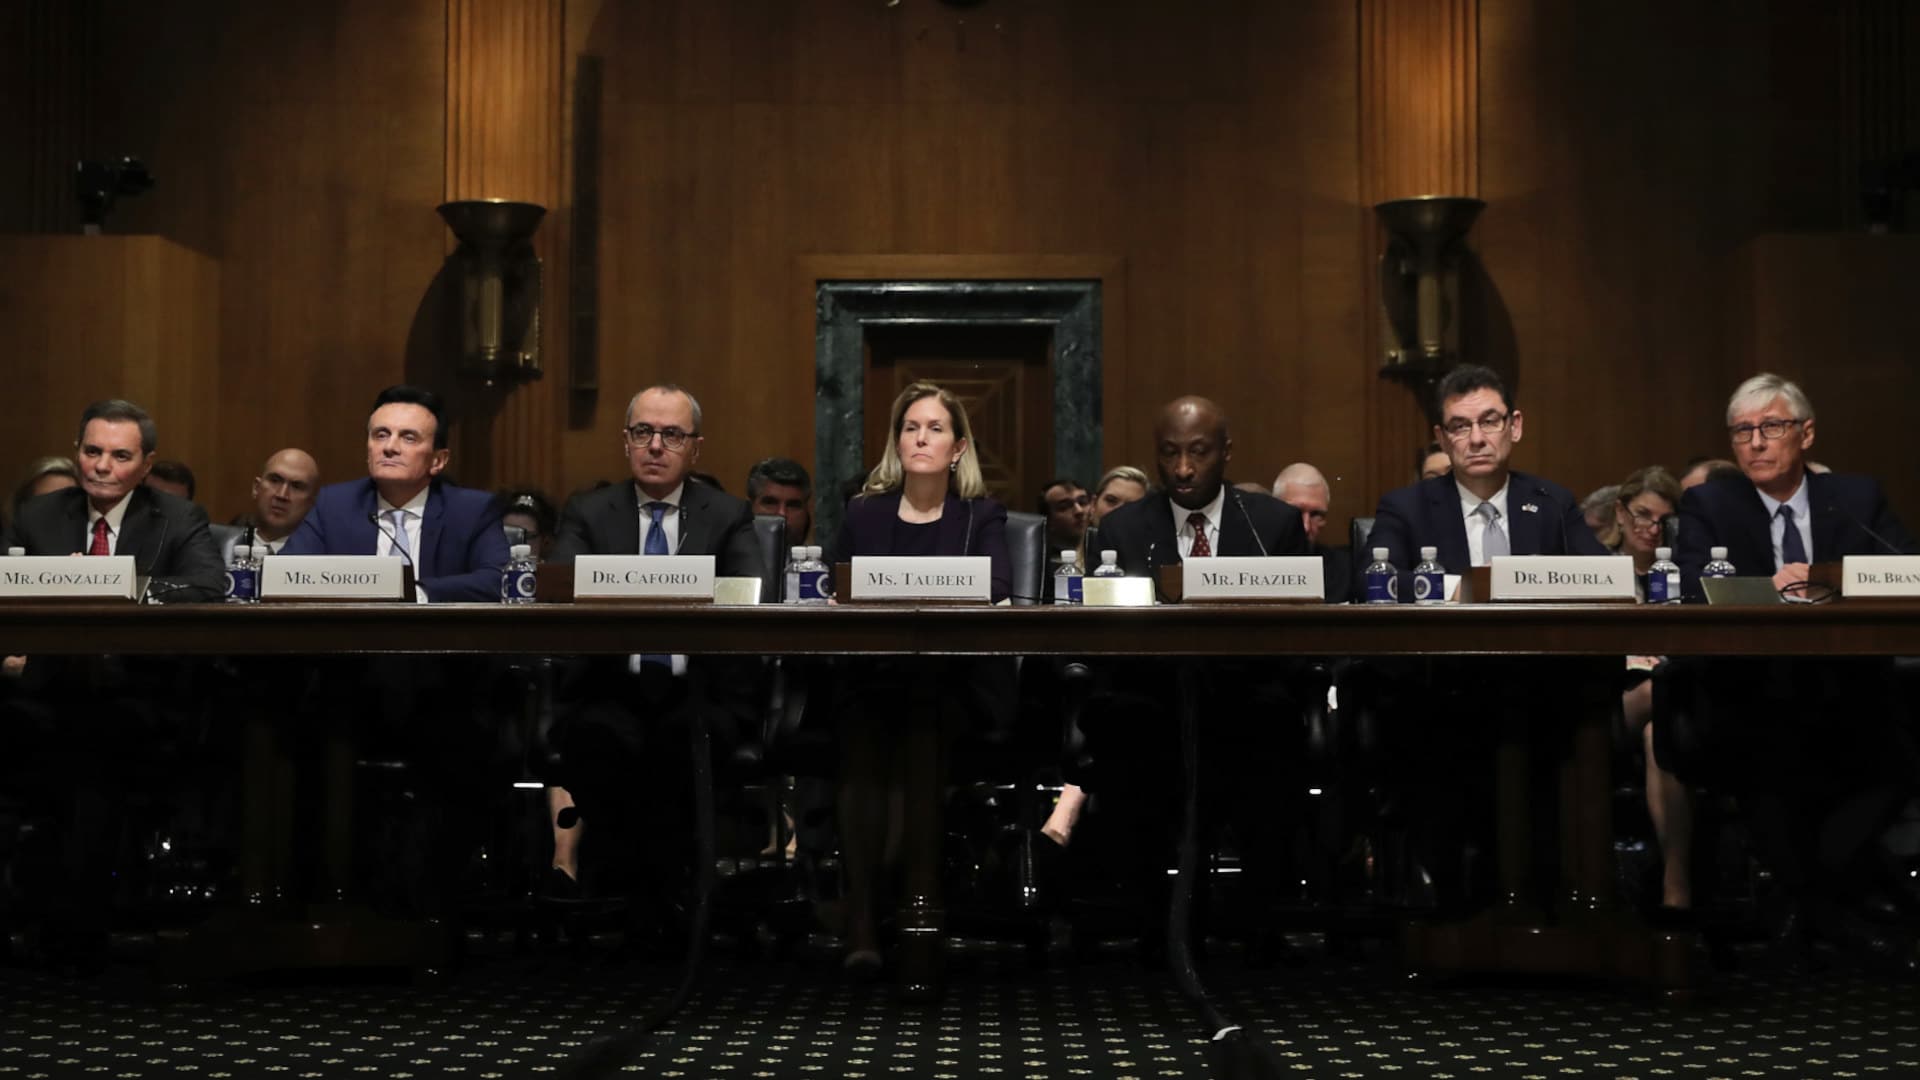 In a 2019 hearing, CEOs of major pharmaceutical companies, including AbbVie, AstraZeneca, Johnson & Johnson, and Pfizer, testify before the Senate Finance Committee.